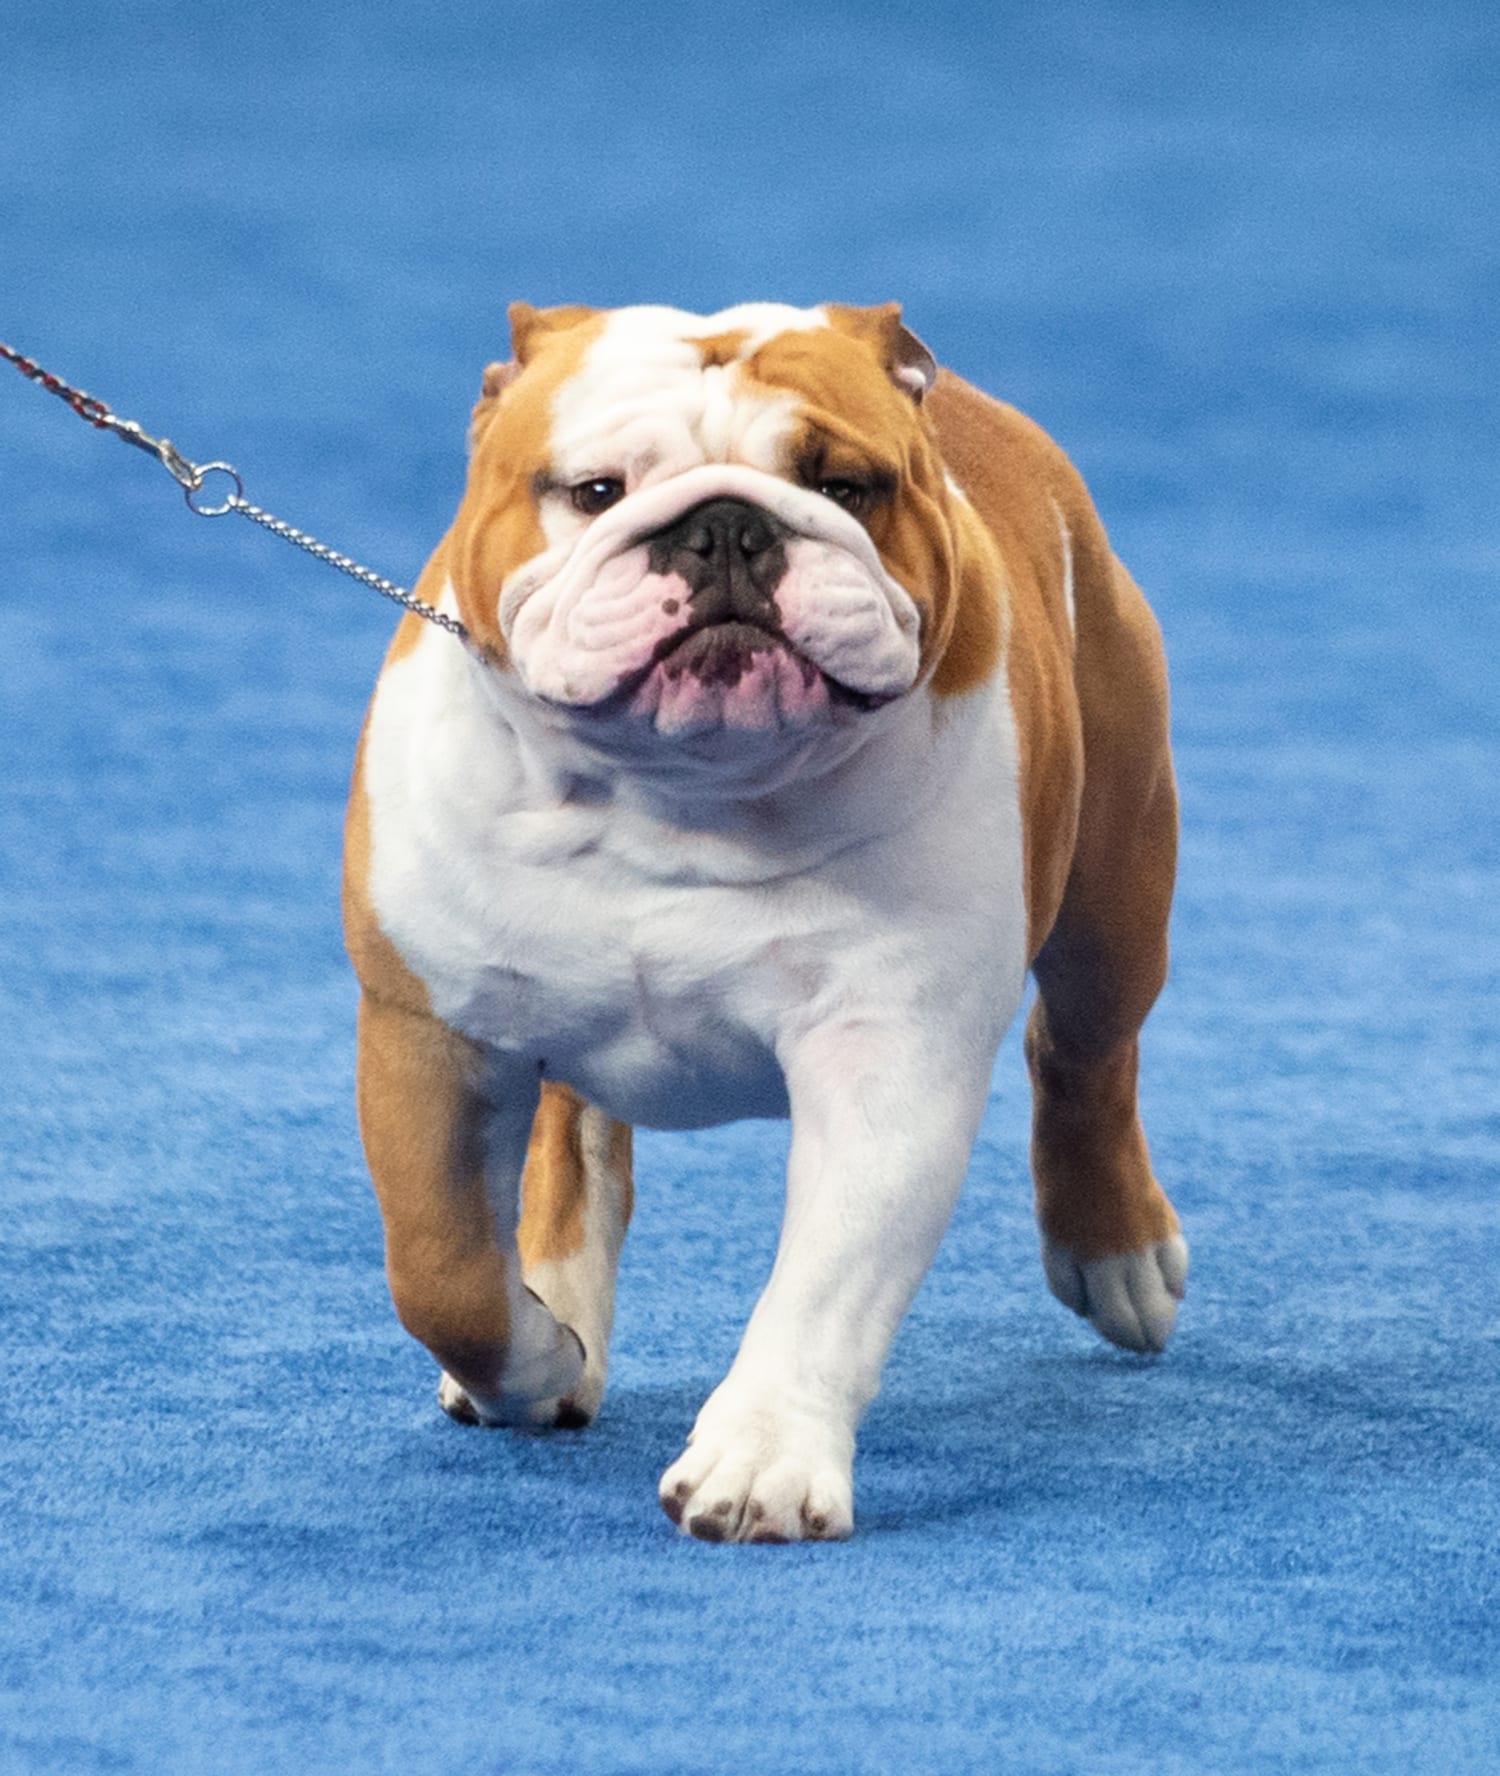 Most popular dog breed rankings are released. Many fans are not